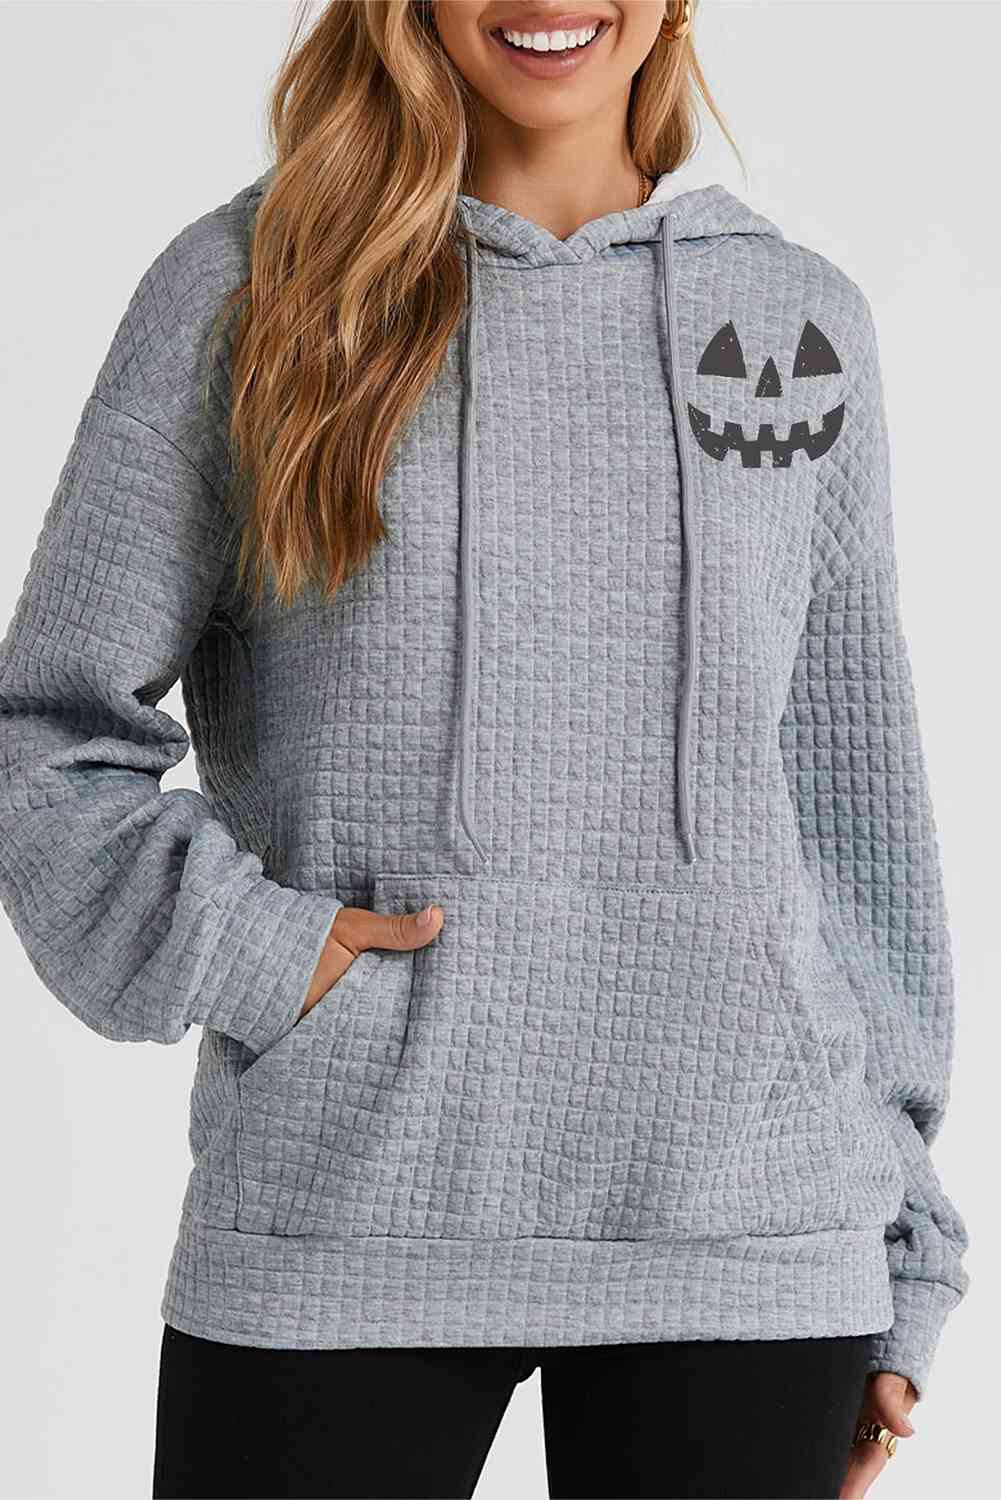 Pumpkin Face Graphic Drawstring Hoodie with Pocket BLUE ZONE PLANET